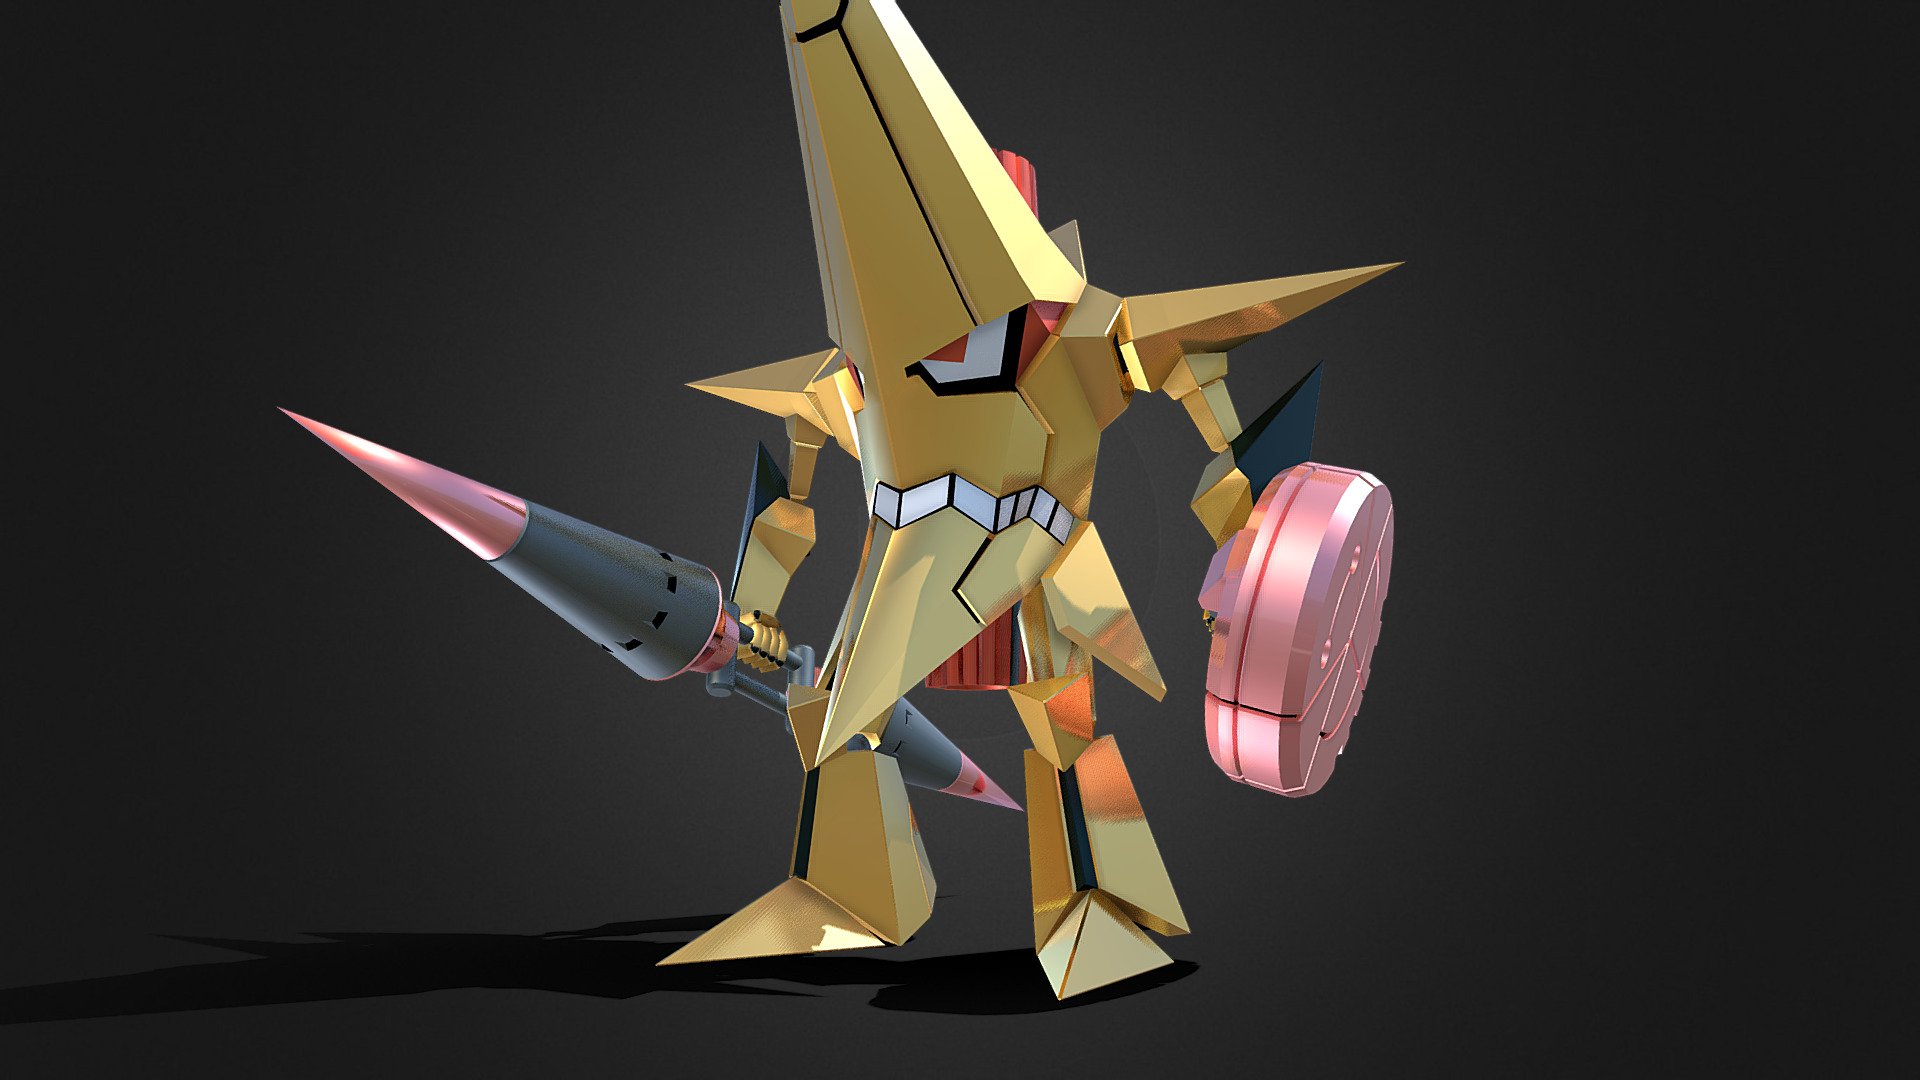 If you're interested in purchasing any of my models, contact me @ andrewdisaacs@yahoo.com

Kittan's personal Ganmen from the anime Tengen Toppa Gurren Lagann.

Made in 3DS Max by myself 3d model